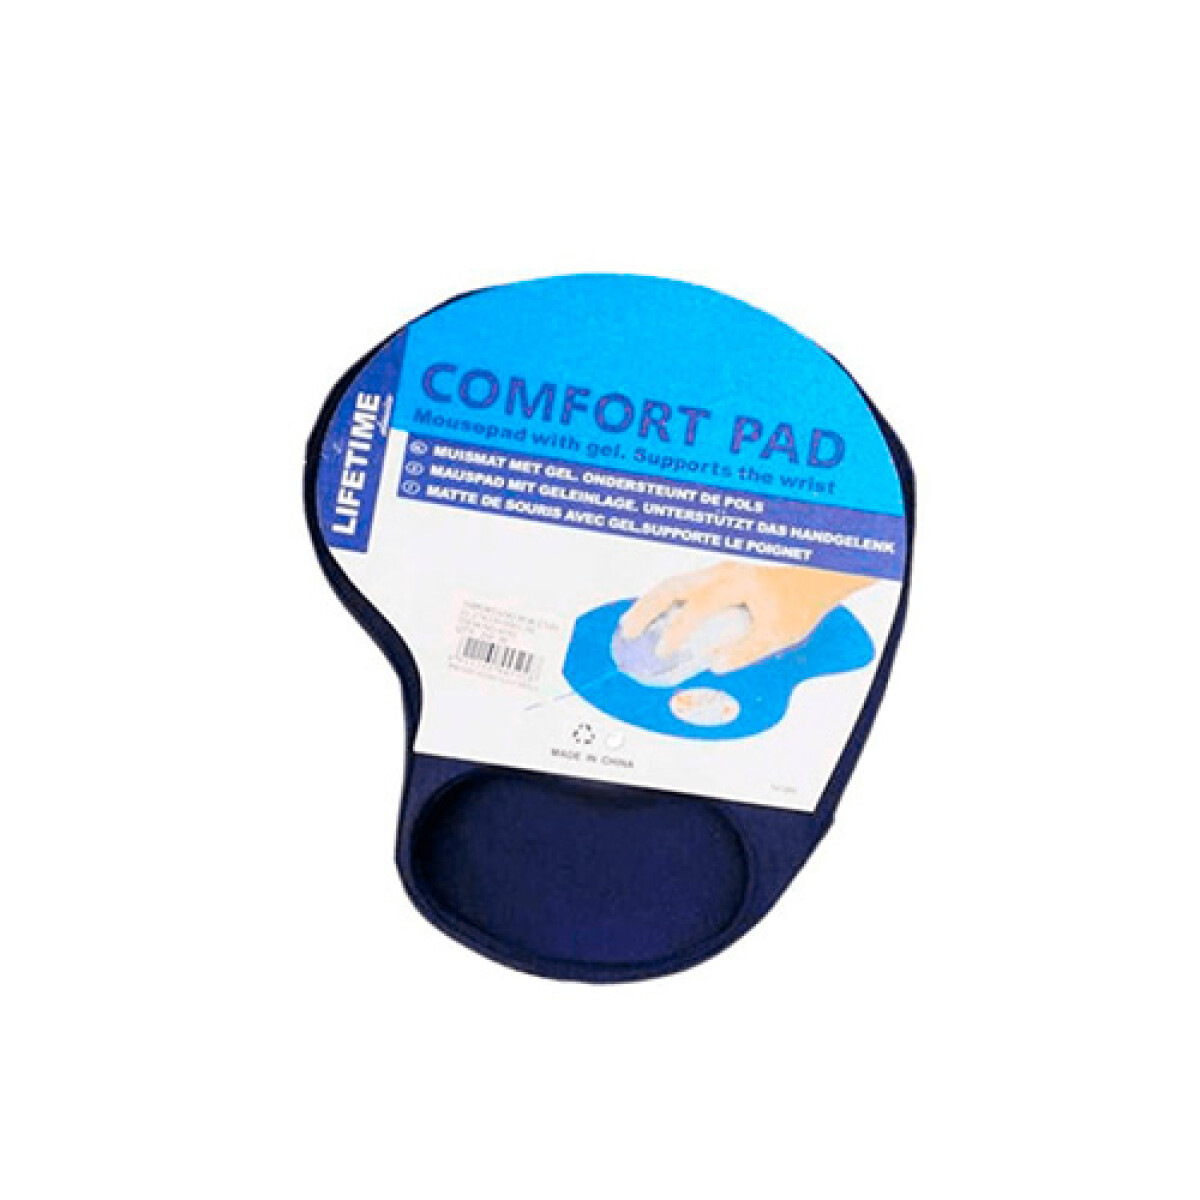 Mouse Pad con Gel - Comfort Pad - 001 